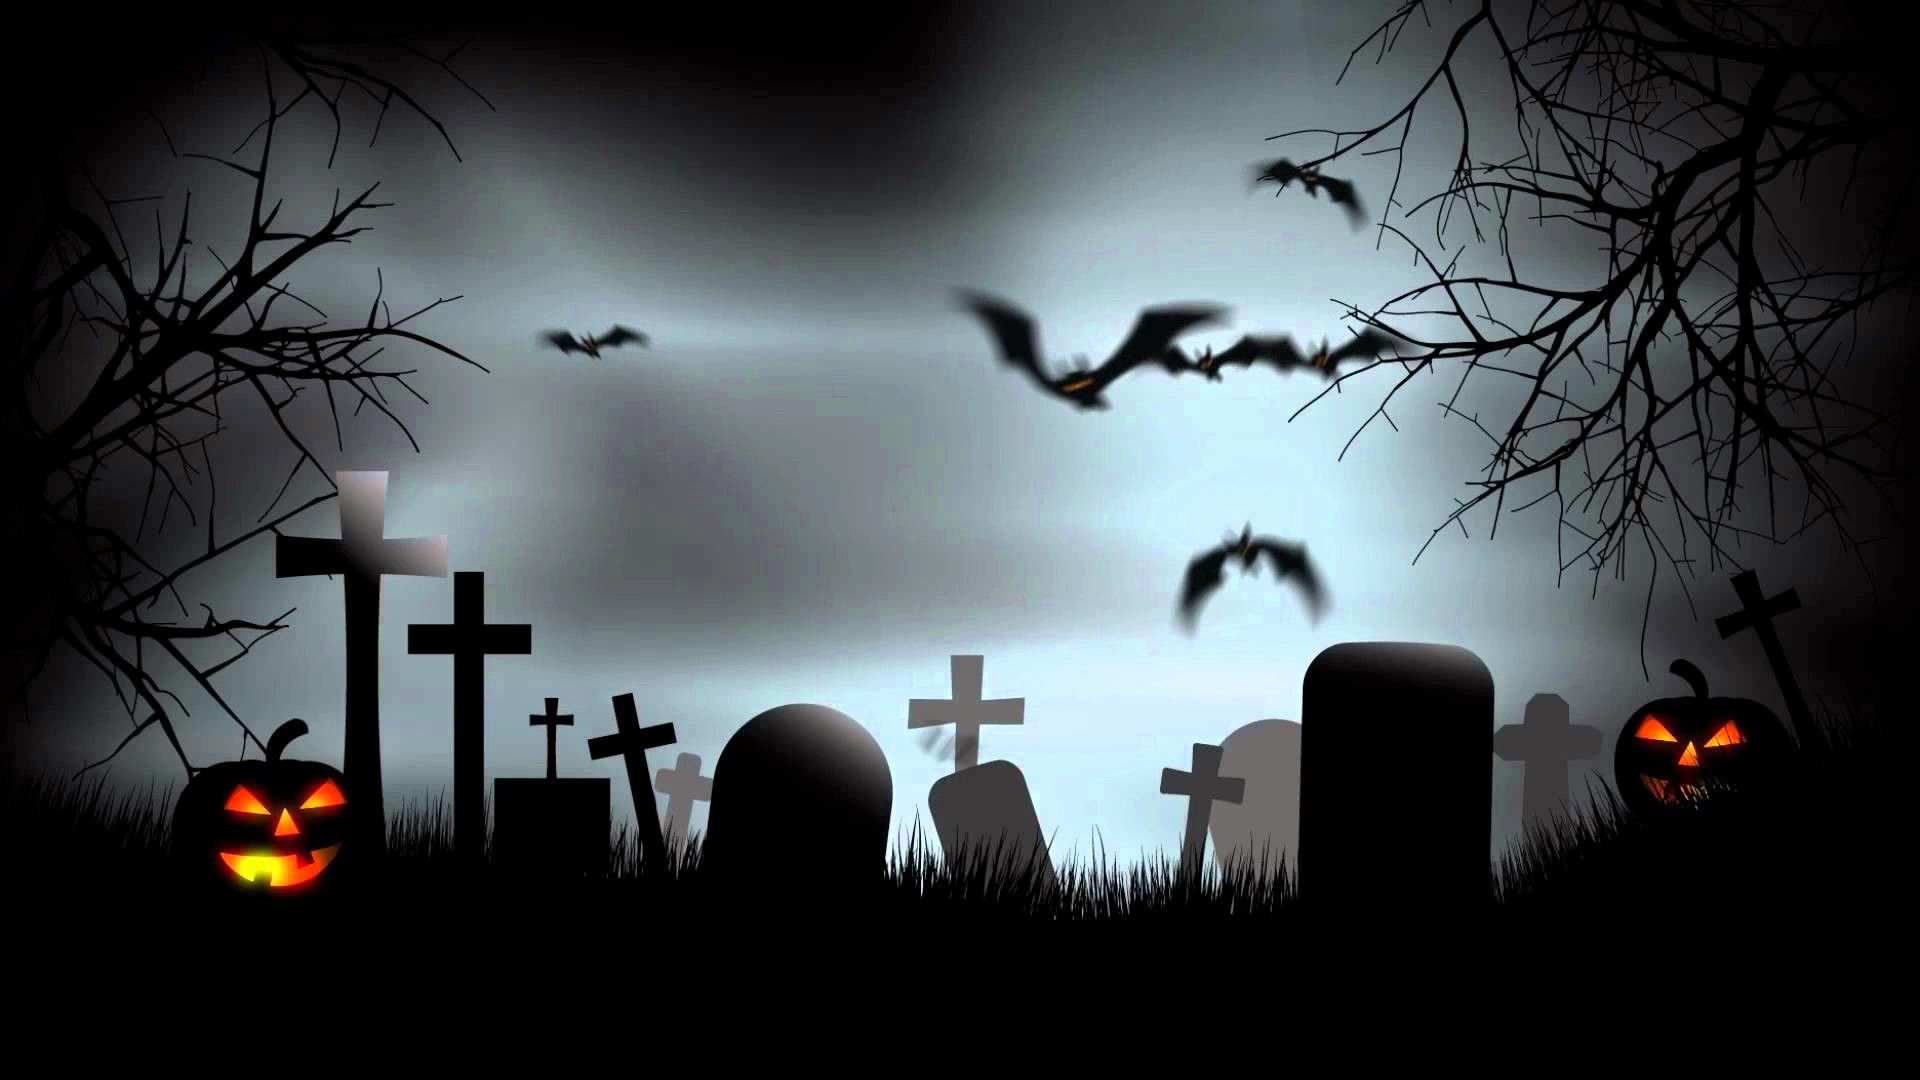 Grave Photos Download The BEST Free Grave Stock Photos  HD Images